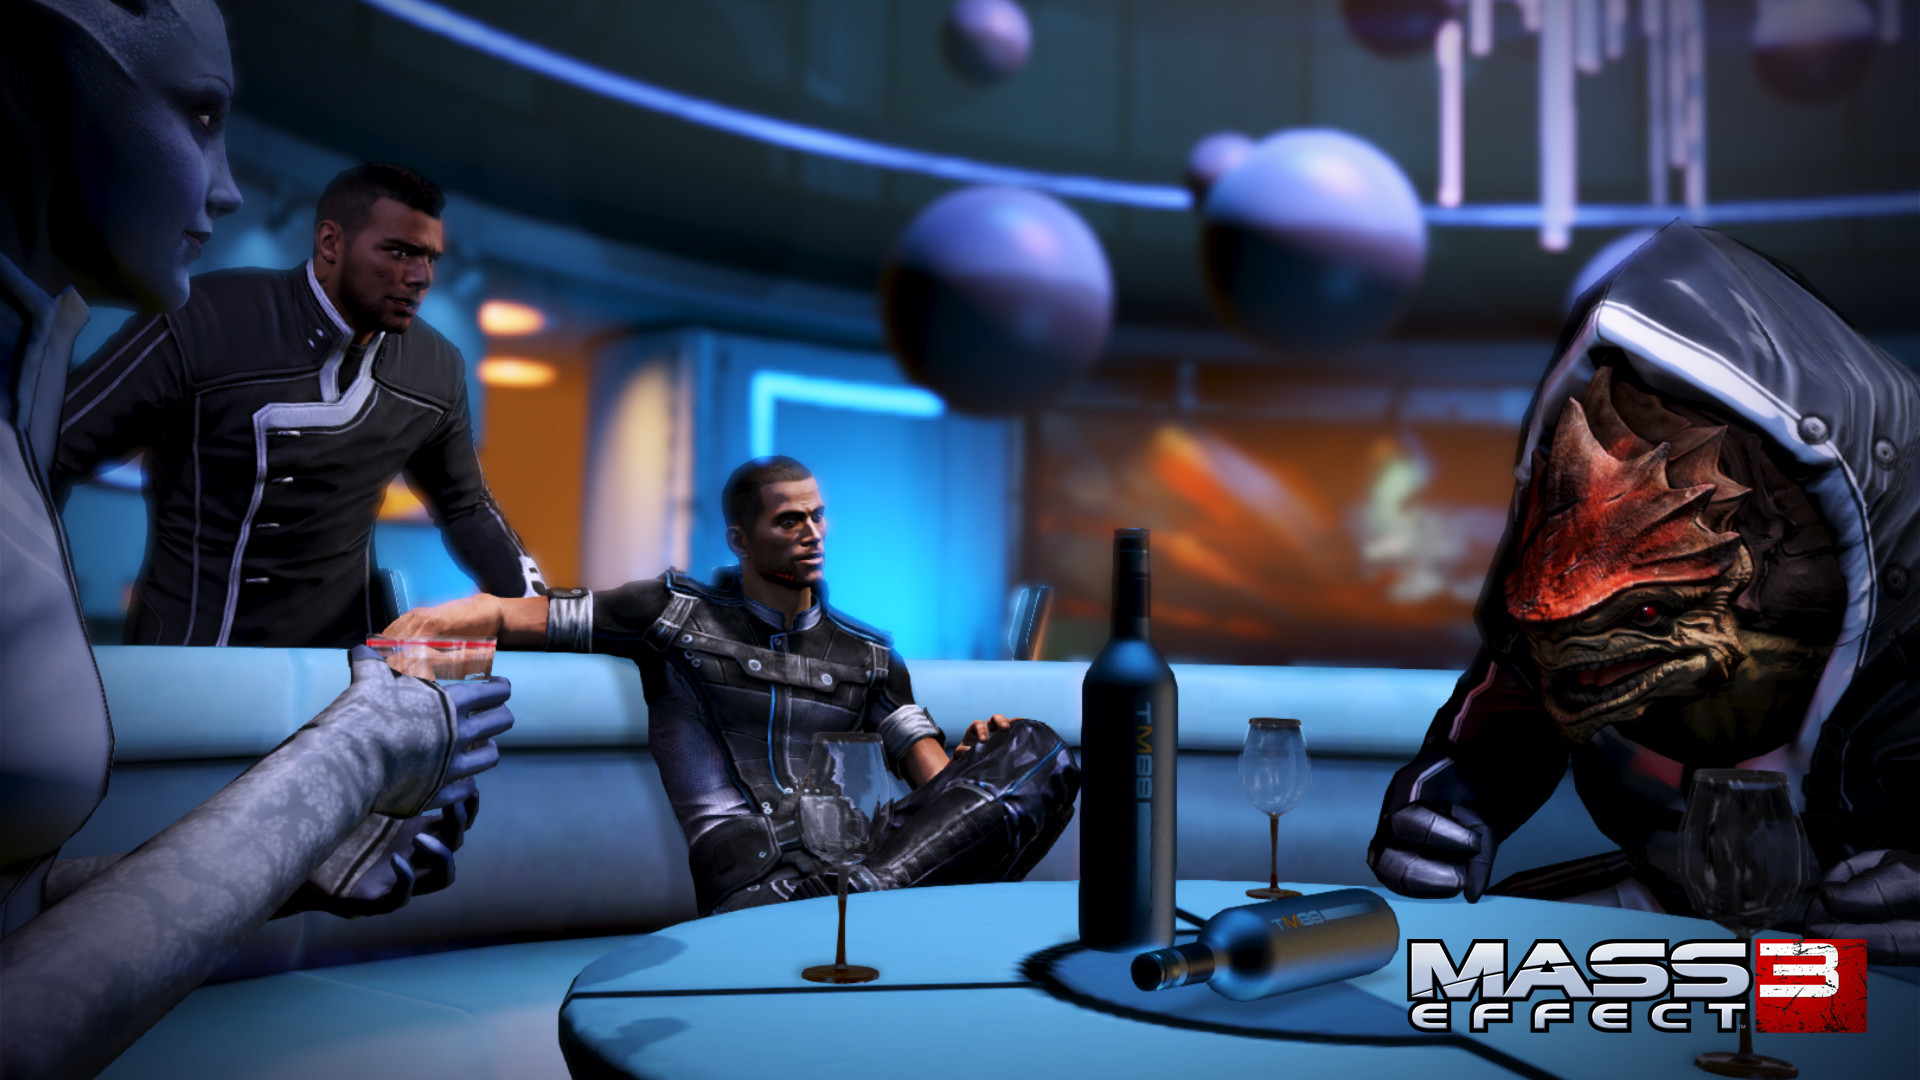 Mass Effect 3 Is One of the Best EA Games Despite Its Ending